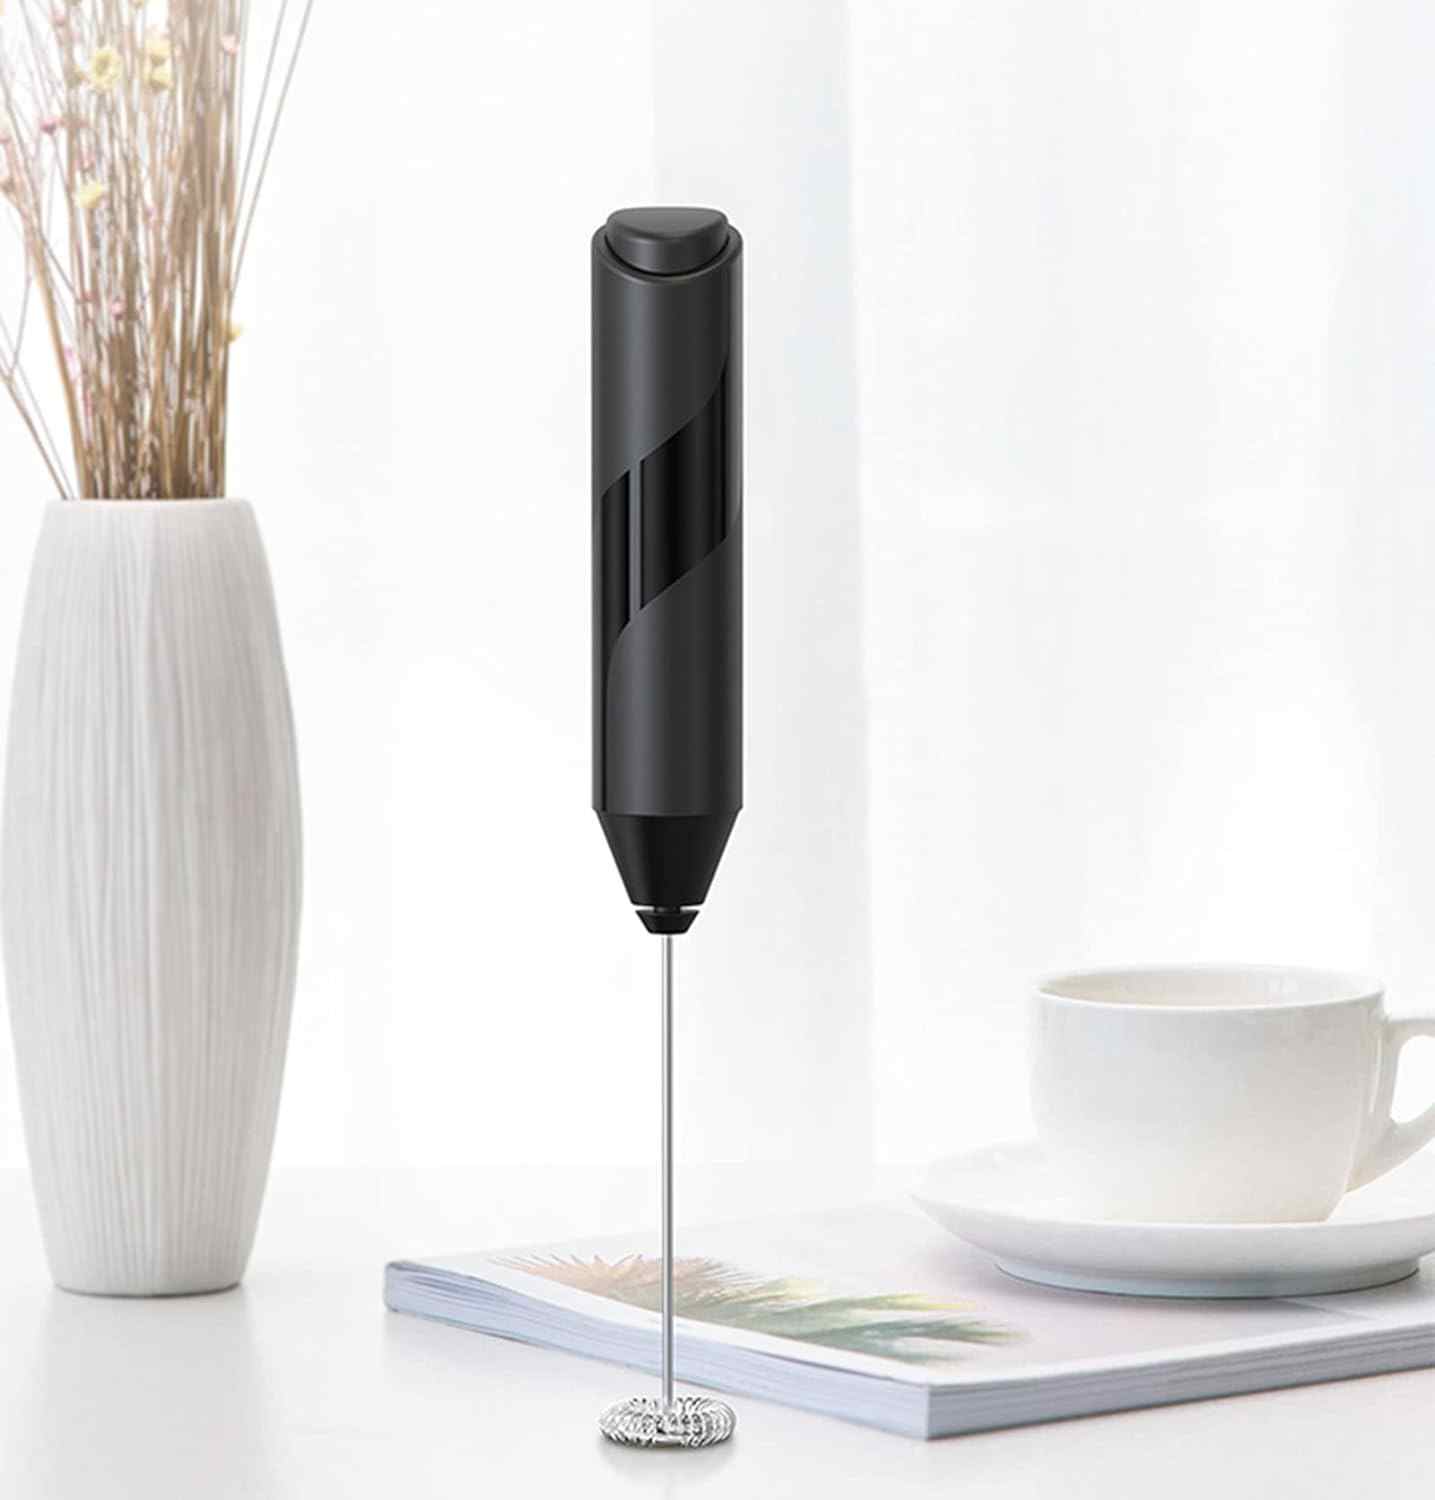 Milk Frother, Handheld Electric Milk Frother, For Coffee, Matcha, Latte Cappuccino, Hot Chocolate, Whipped Egg (Black)